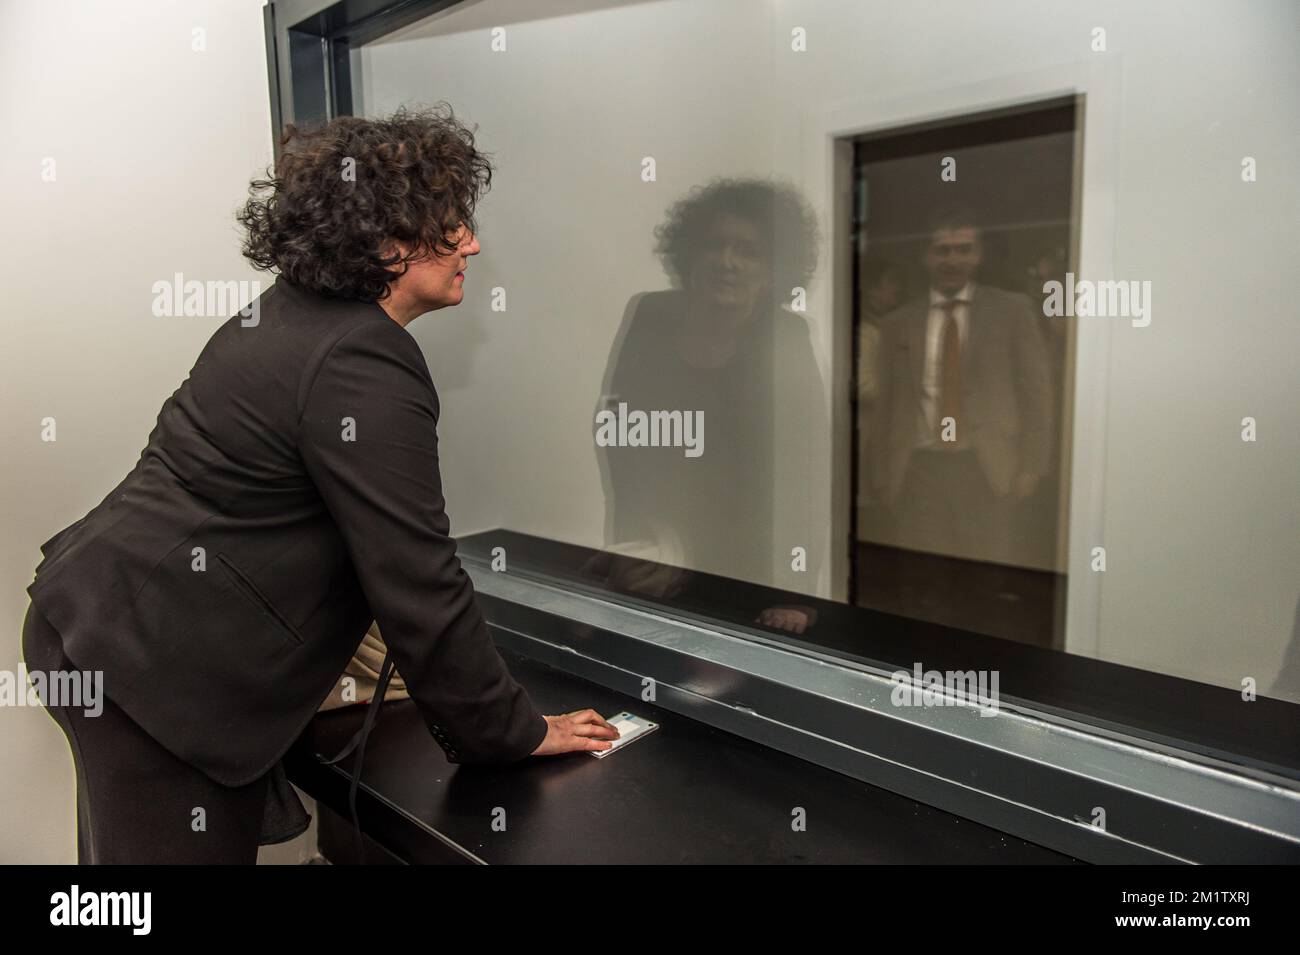 20140214 - BEVEREN-WAAS, BELGIUM: Minister of Justice Annemie Turtelboom is seen during the official opening of the new jail in Melsele, Beveren, which is one of the four new prisons planned in Belgium to enlarge the number of cells. BELGA PHOTO JONAS ROOSENS Stock Photo